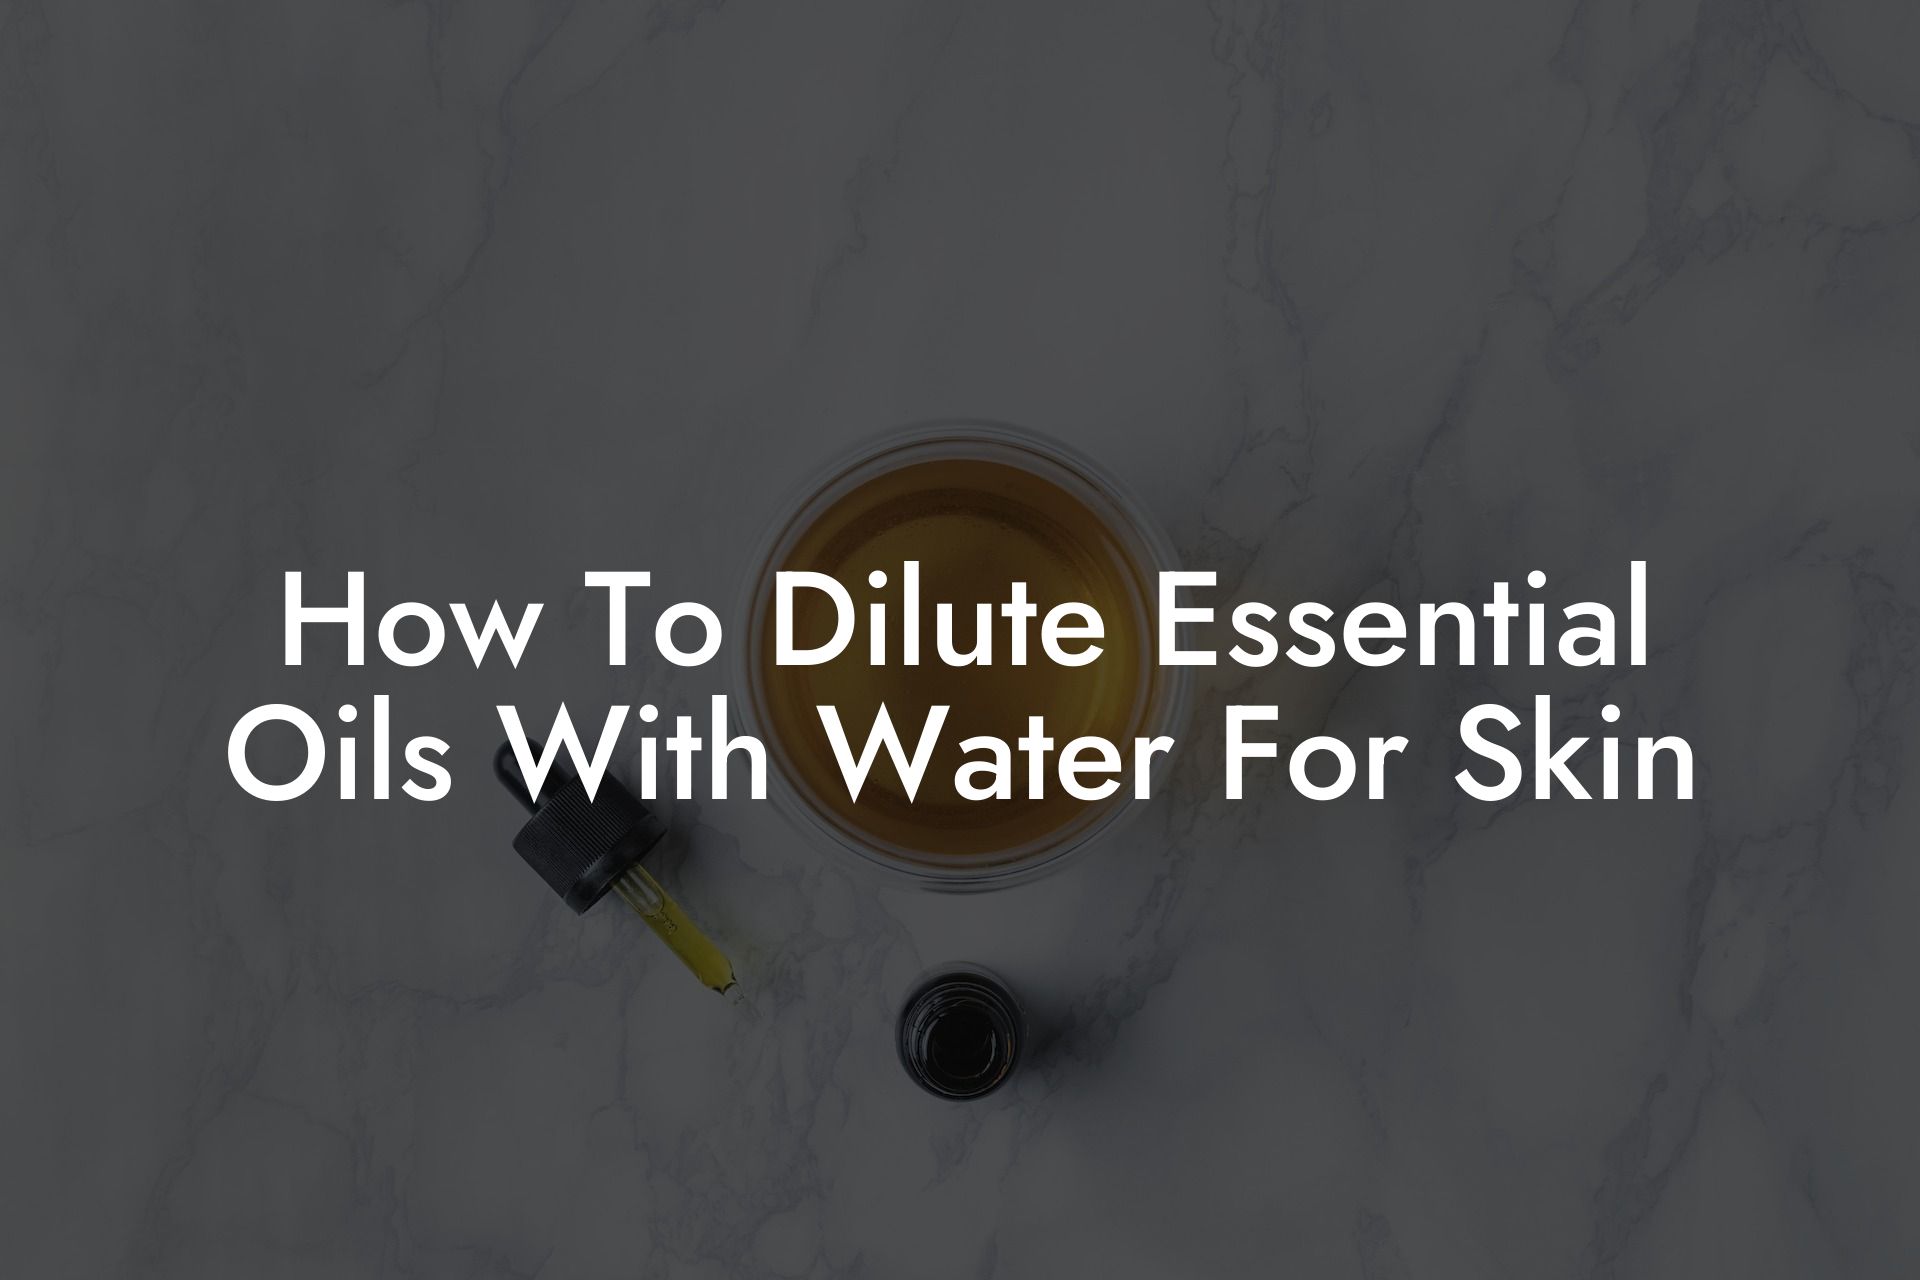 How To Dilute Essential Oils With Water For Skin